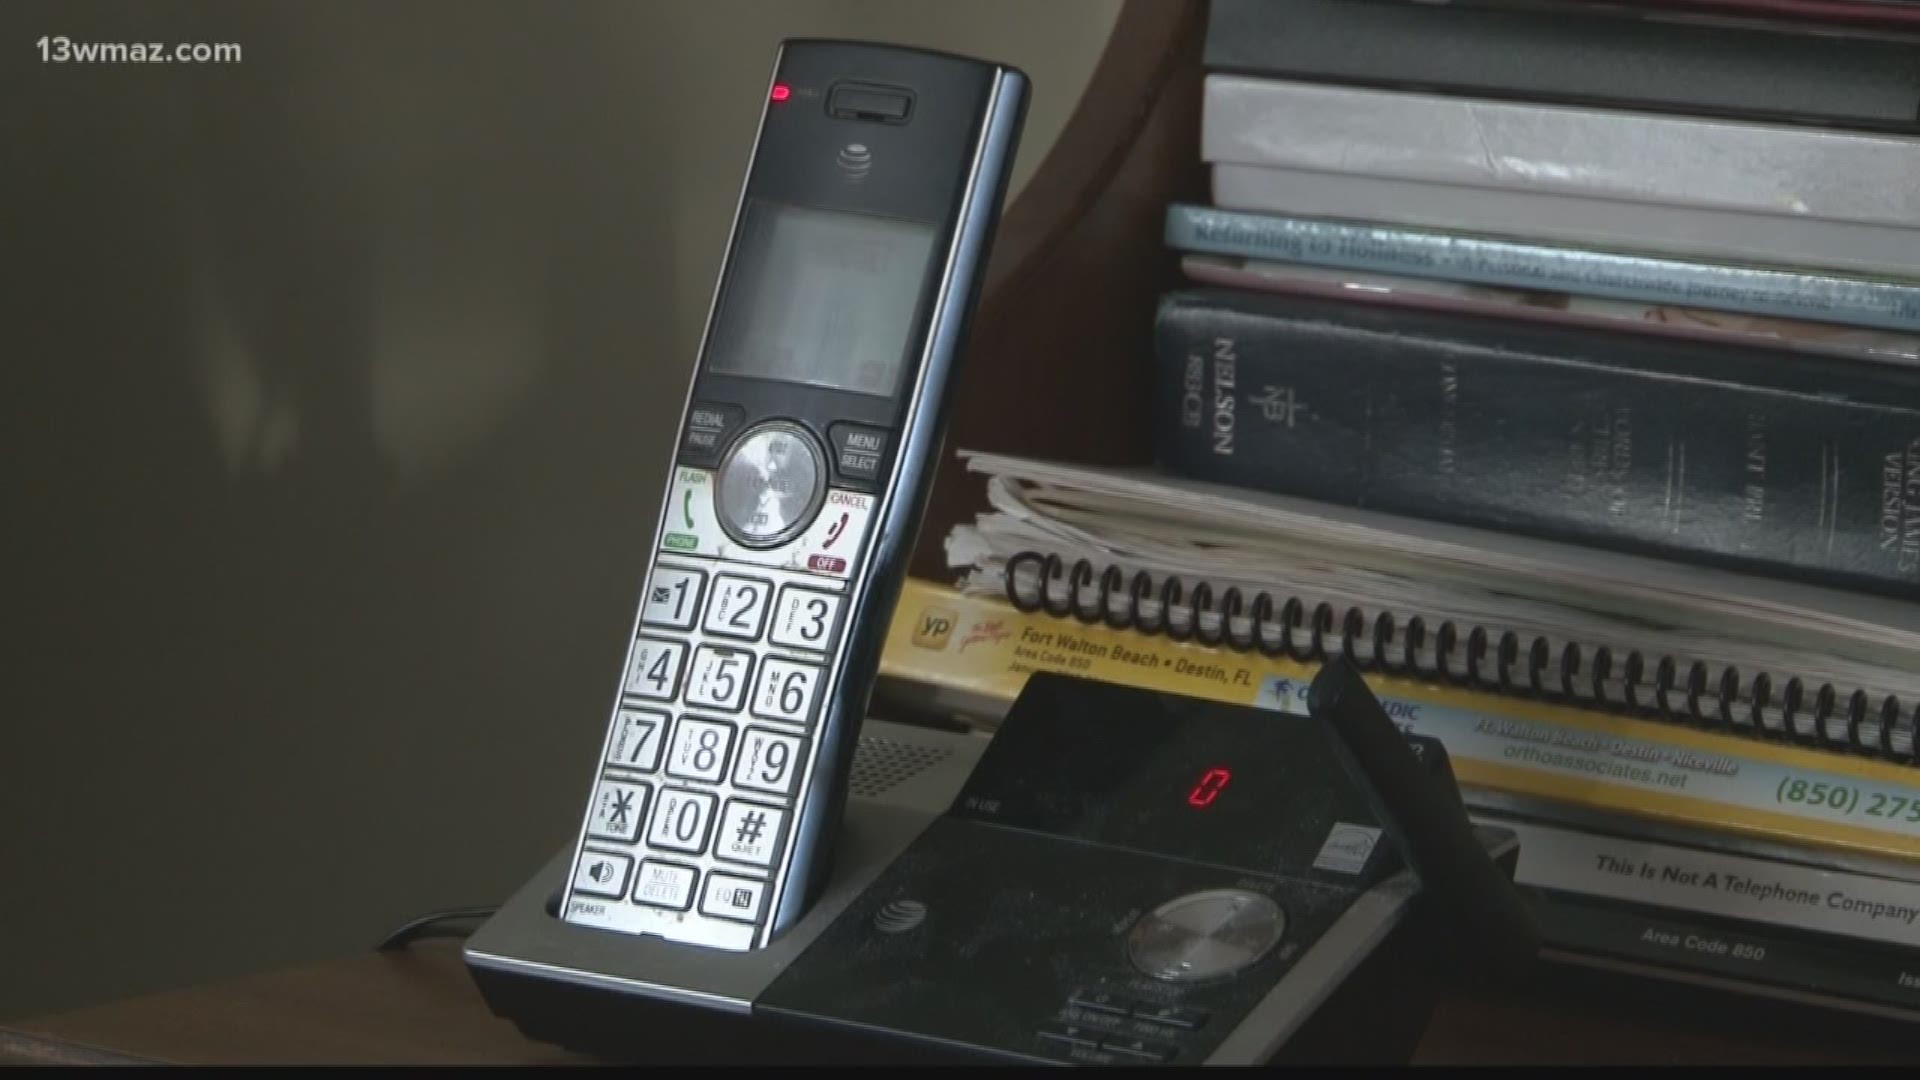 Sometimes using a smartphone or a smart device comes with a risk. One Macon woman was scammed out of thousands of dollars.